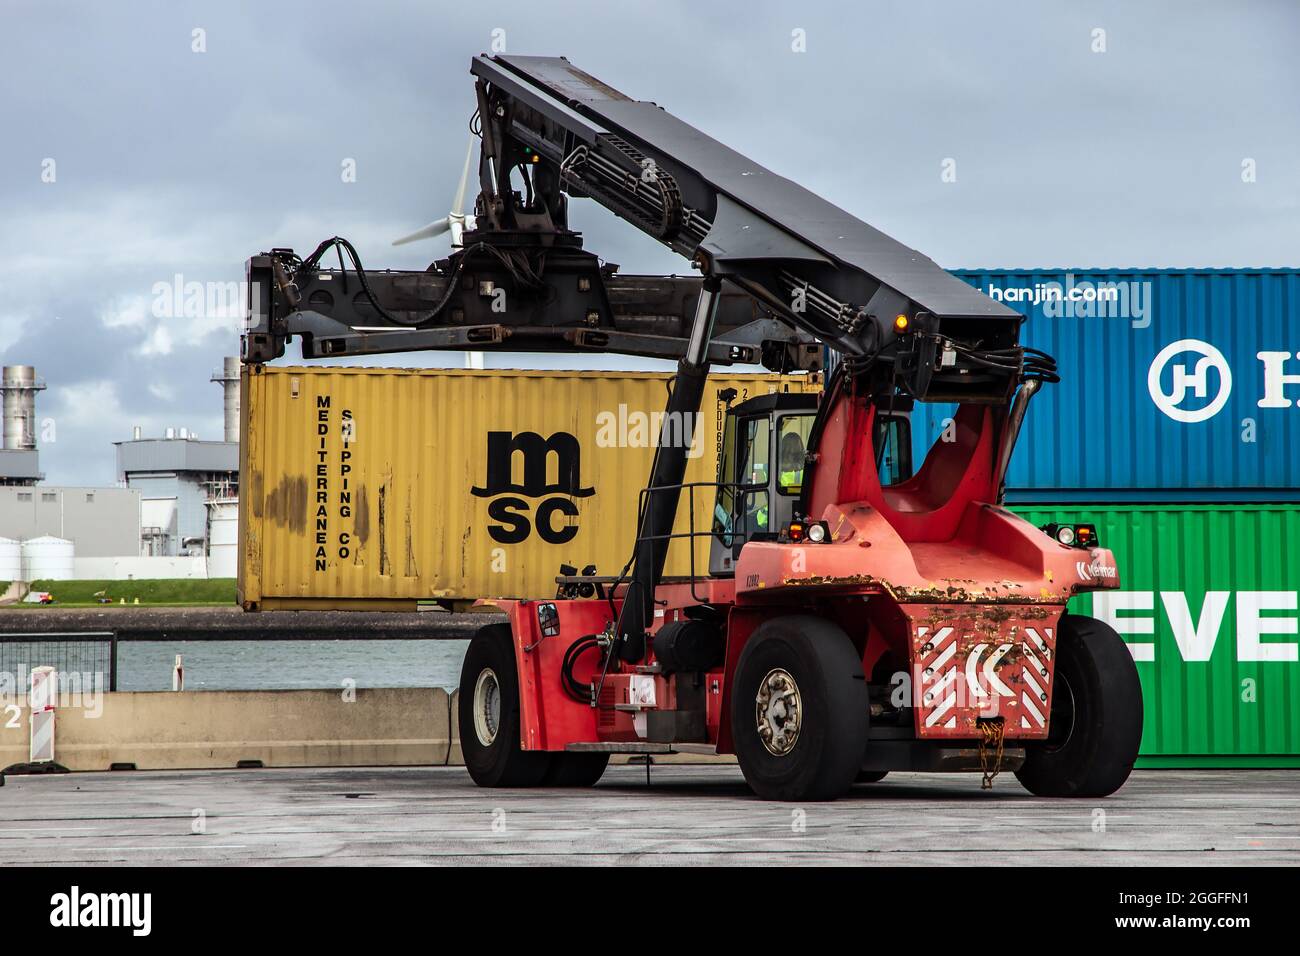 Mobile container handler in action at a container terminal in the Port of Rotterdam. September 6, 2015 Stock Photo